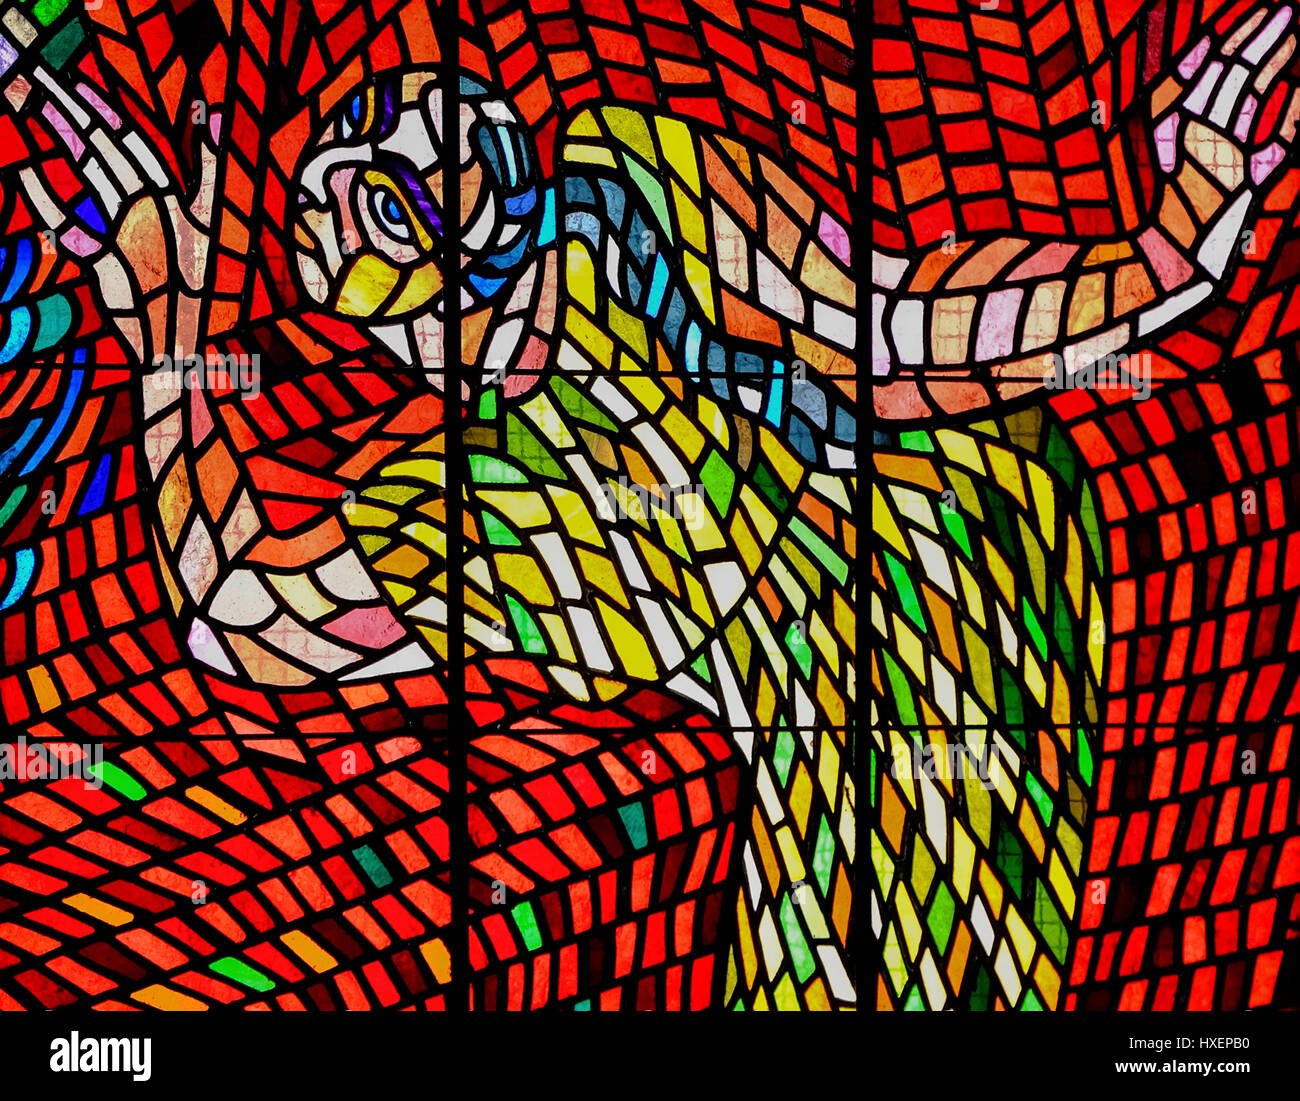 Stained glass window inside Saint Vitus Cathedral, Prague, Czech Republic. Stock Photo